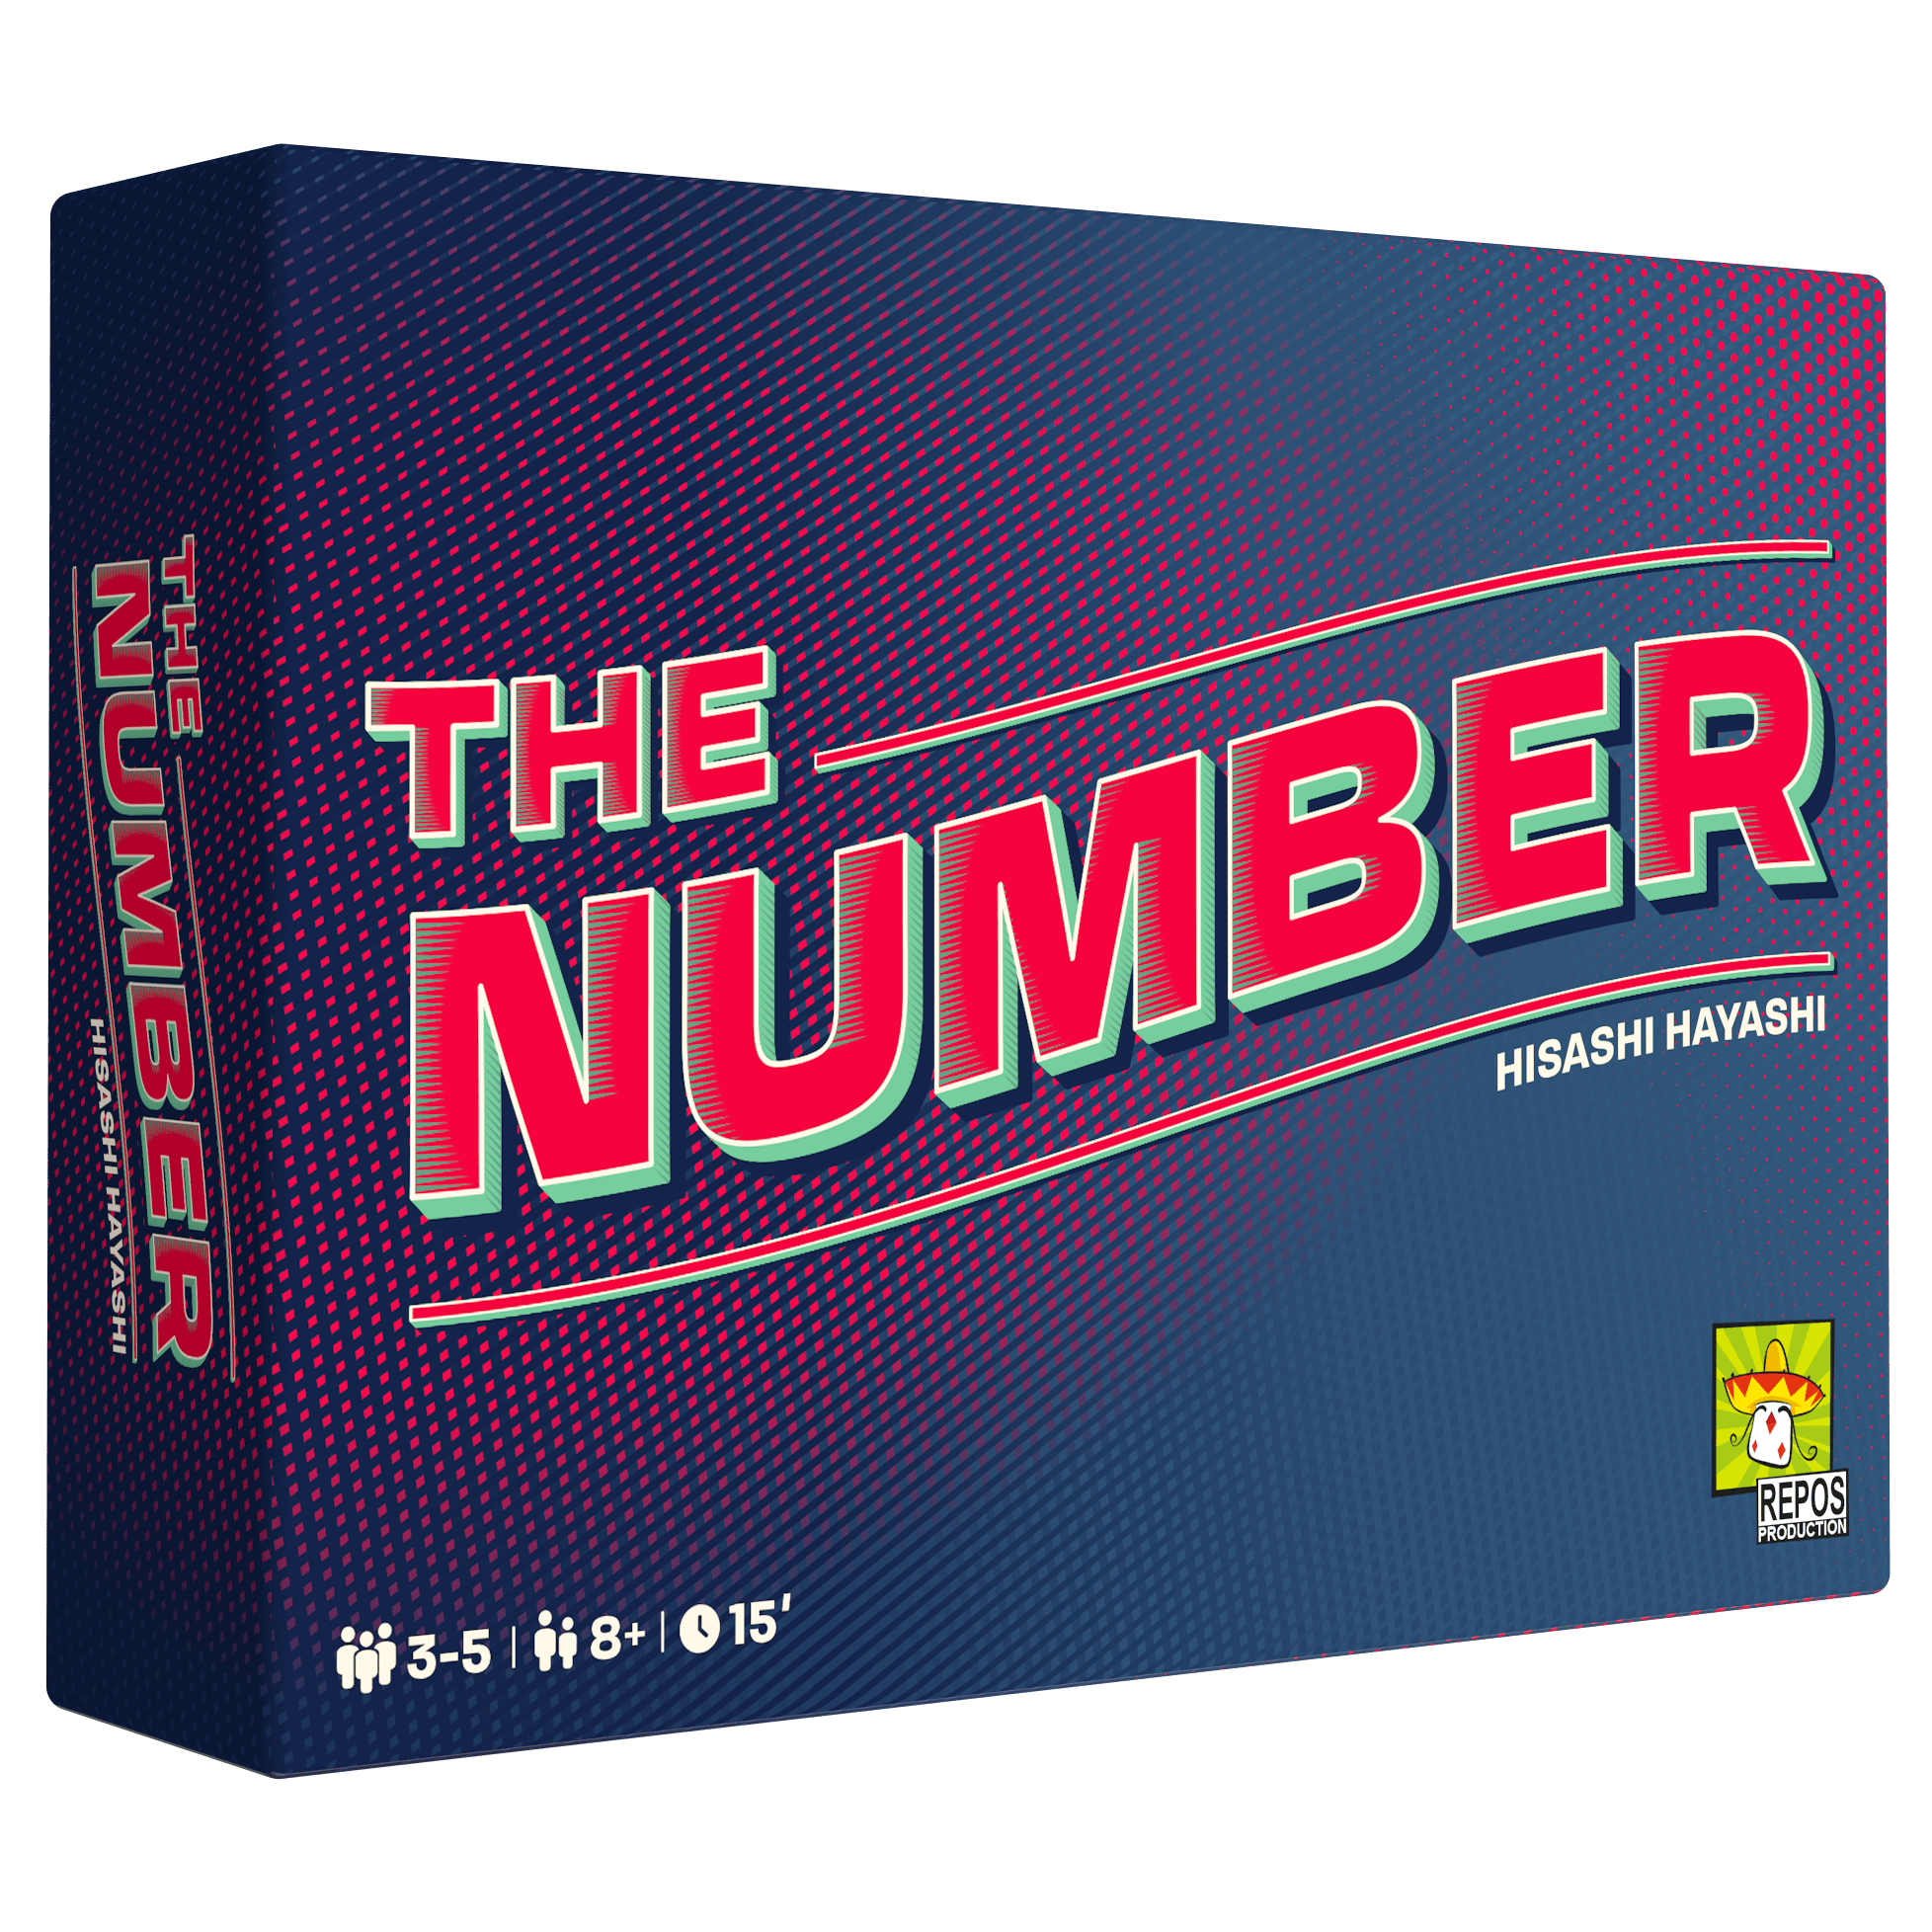 https://cdn.svc.asmodee.net/production-asmodeeit/uploads/2023/05/the-number_8422_box.png